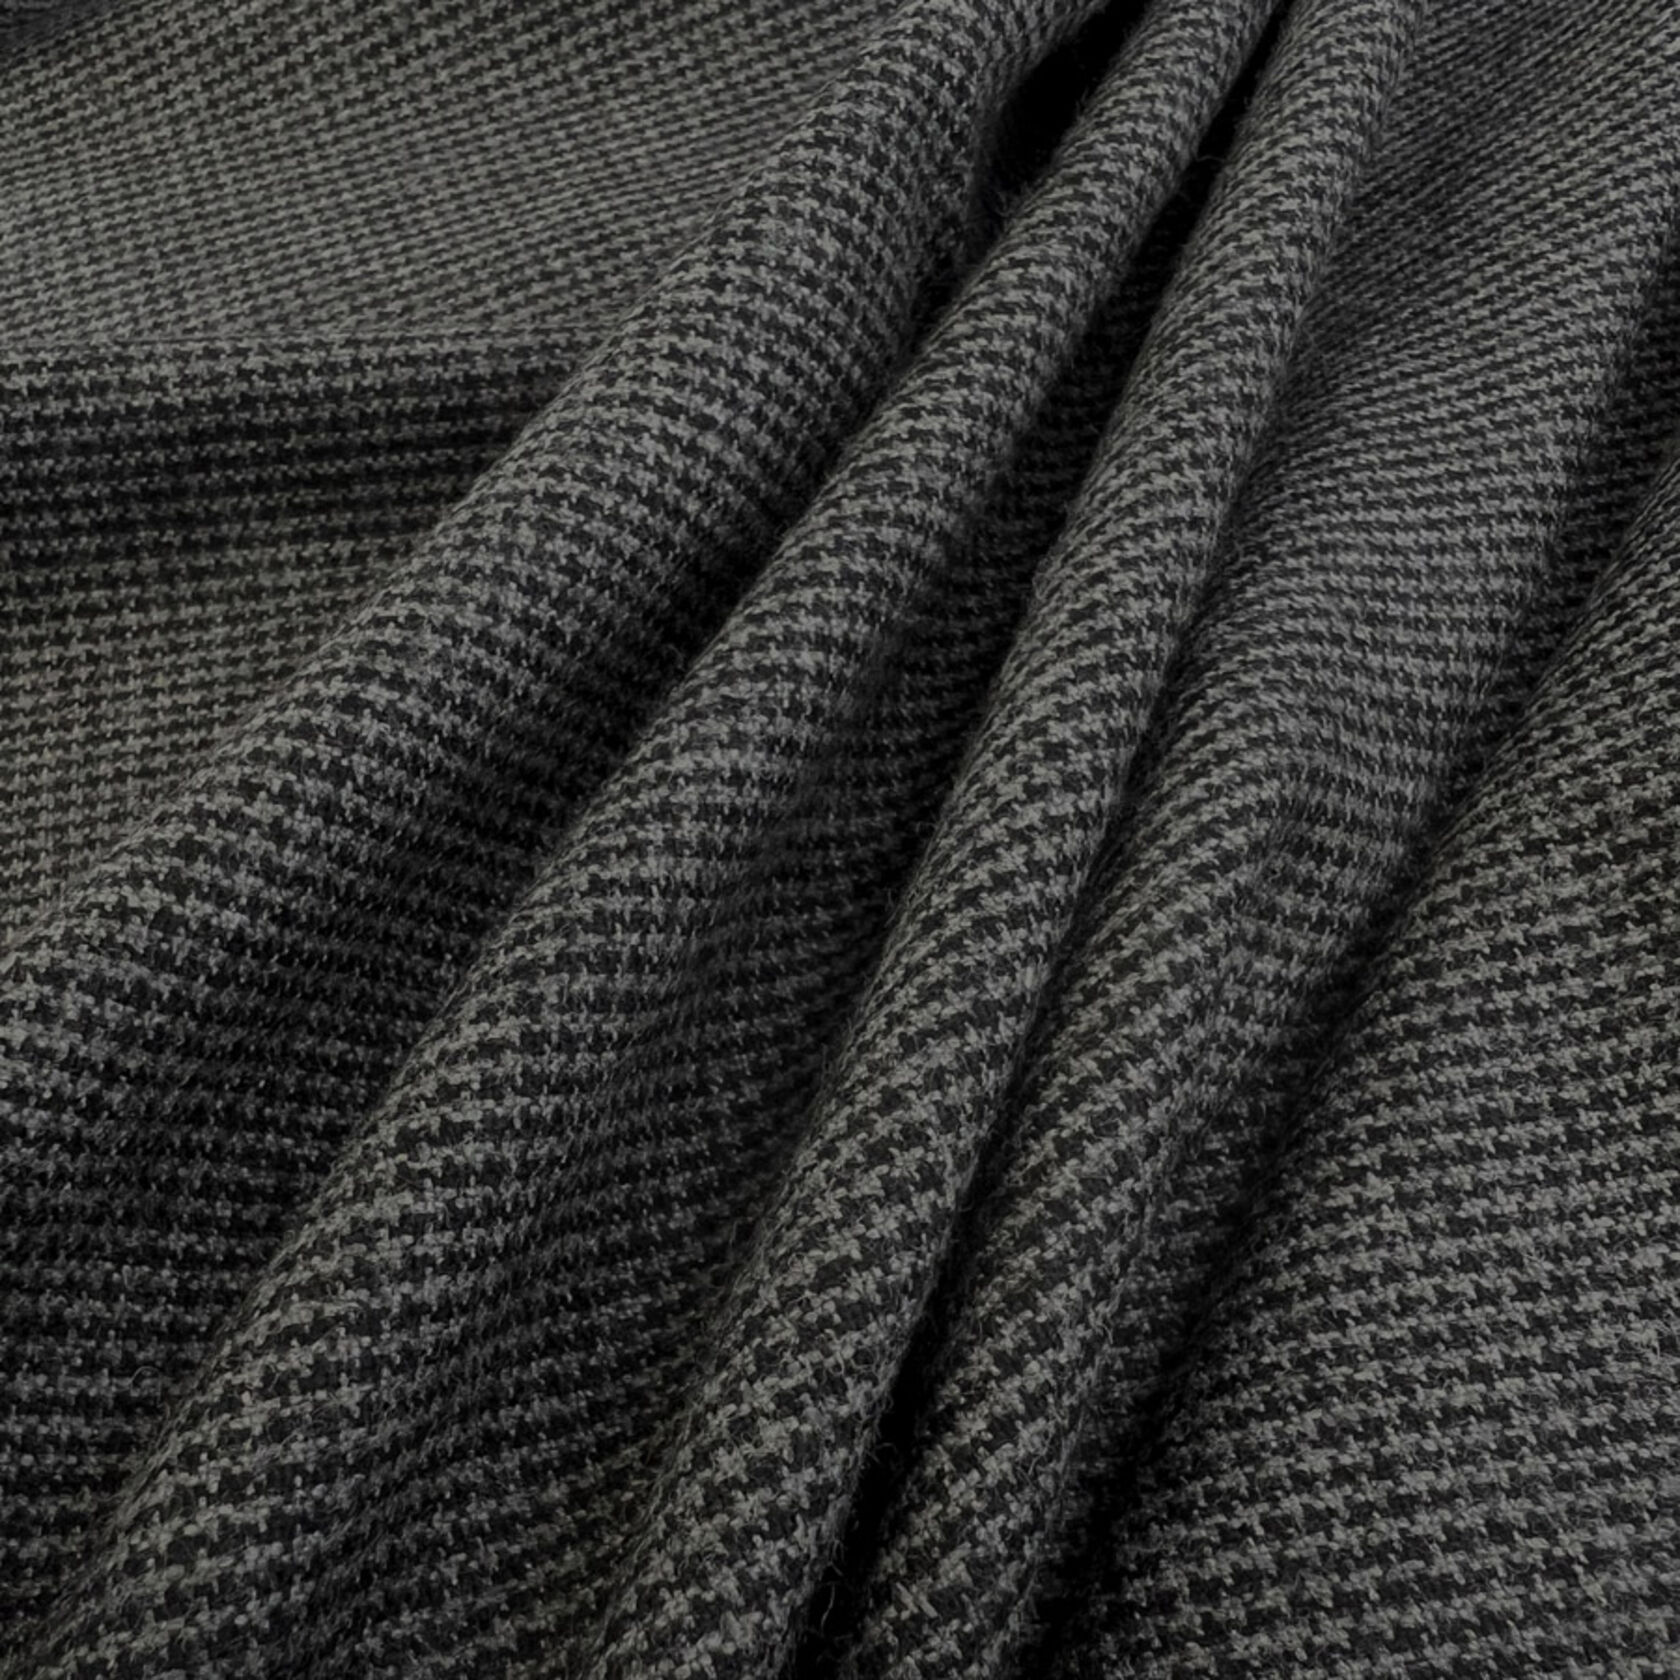 https://www.croftmill.co.uk/images/pictures/00-2023/08-august-2023/loose_change_italian_wool_check_houndstooth_black_grey_suiting_fabric_cu-(840x840).jpg?v=58e88e8f